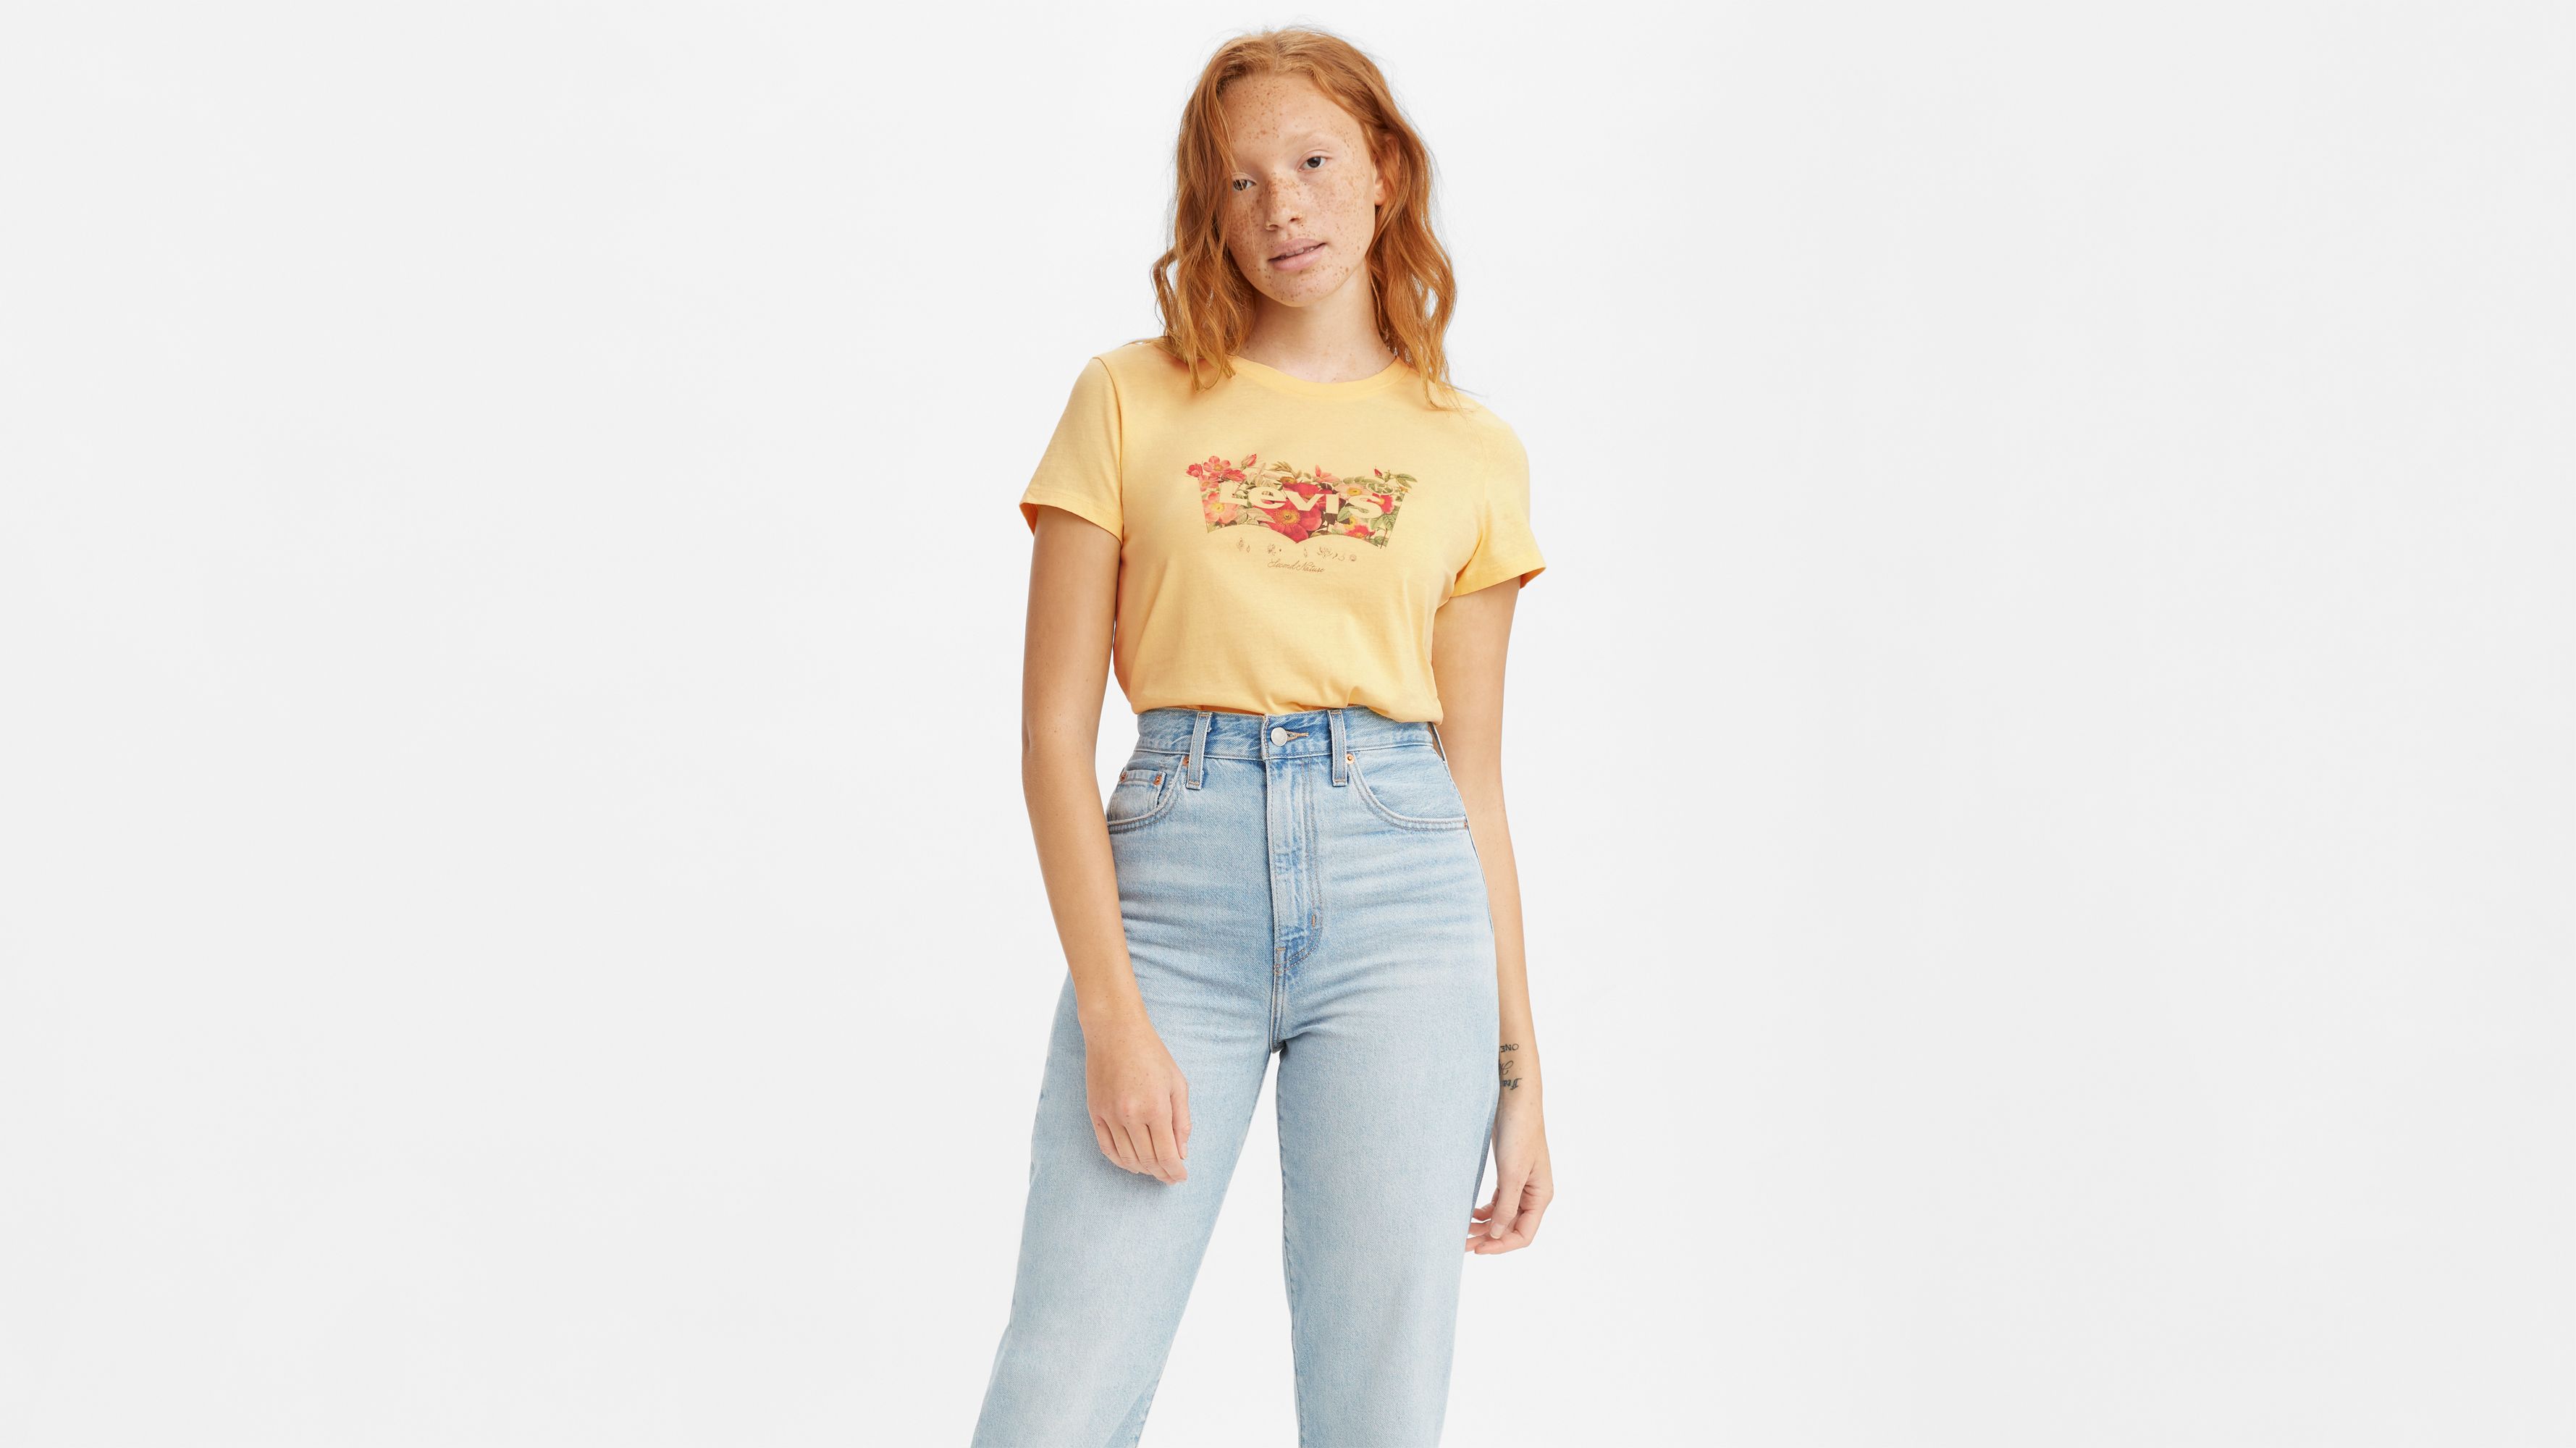 levis t shirt for womens online